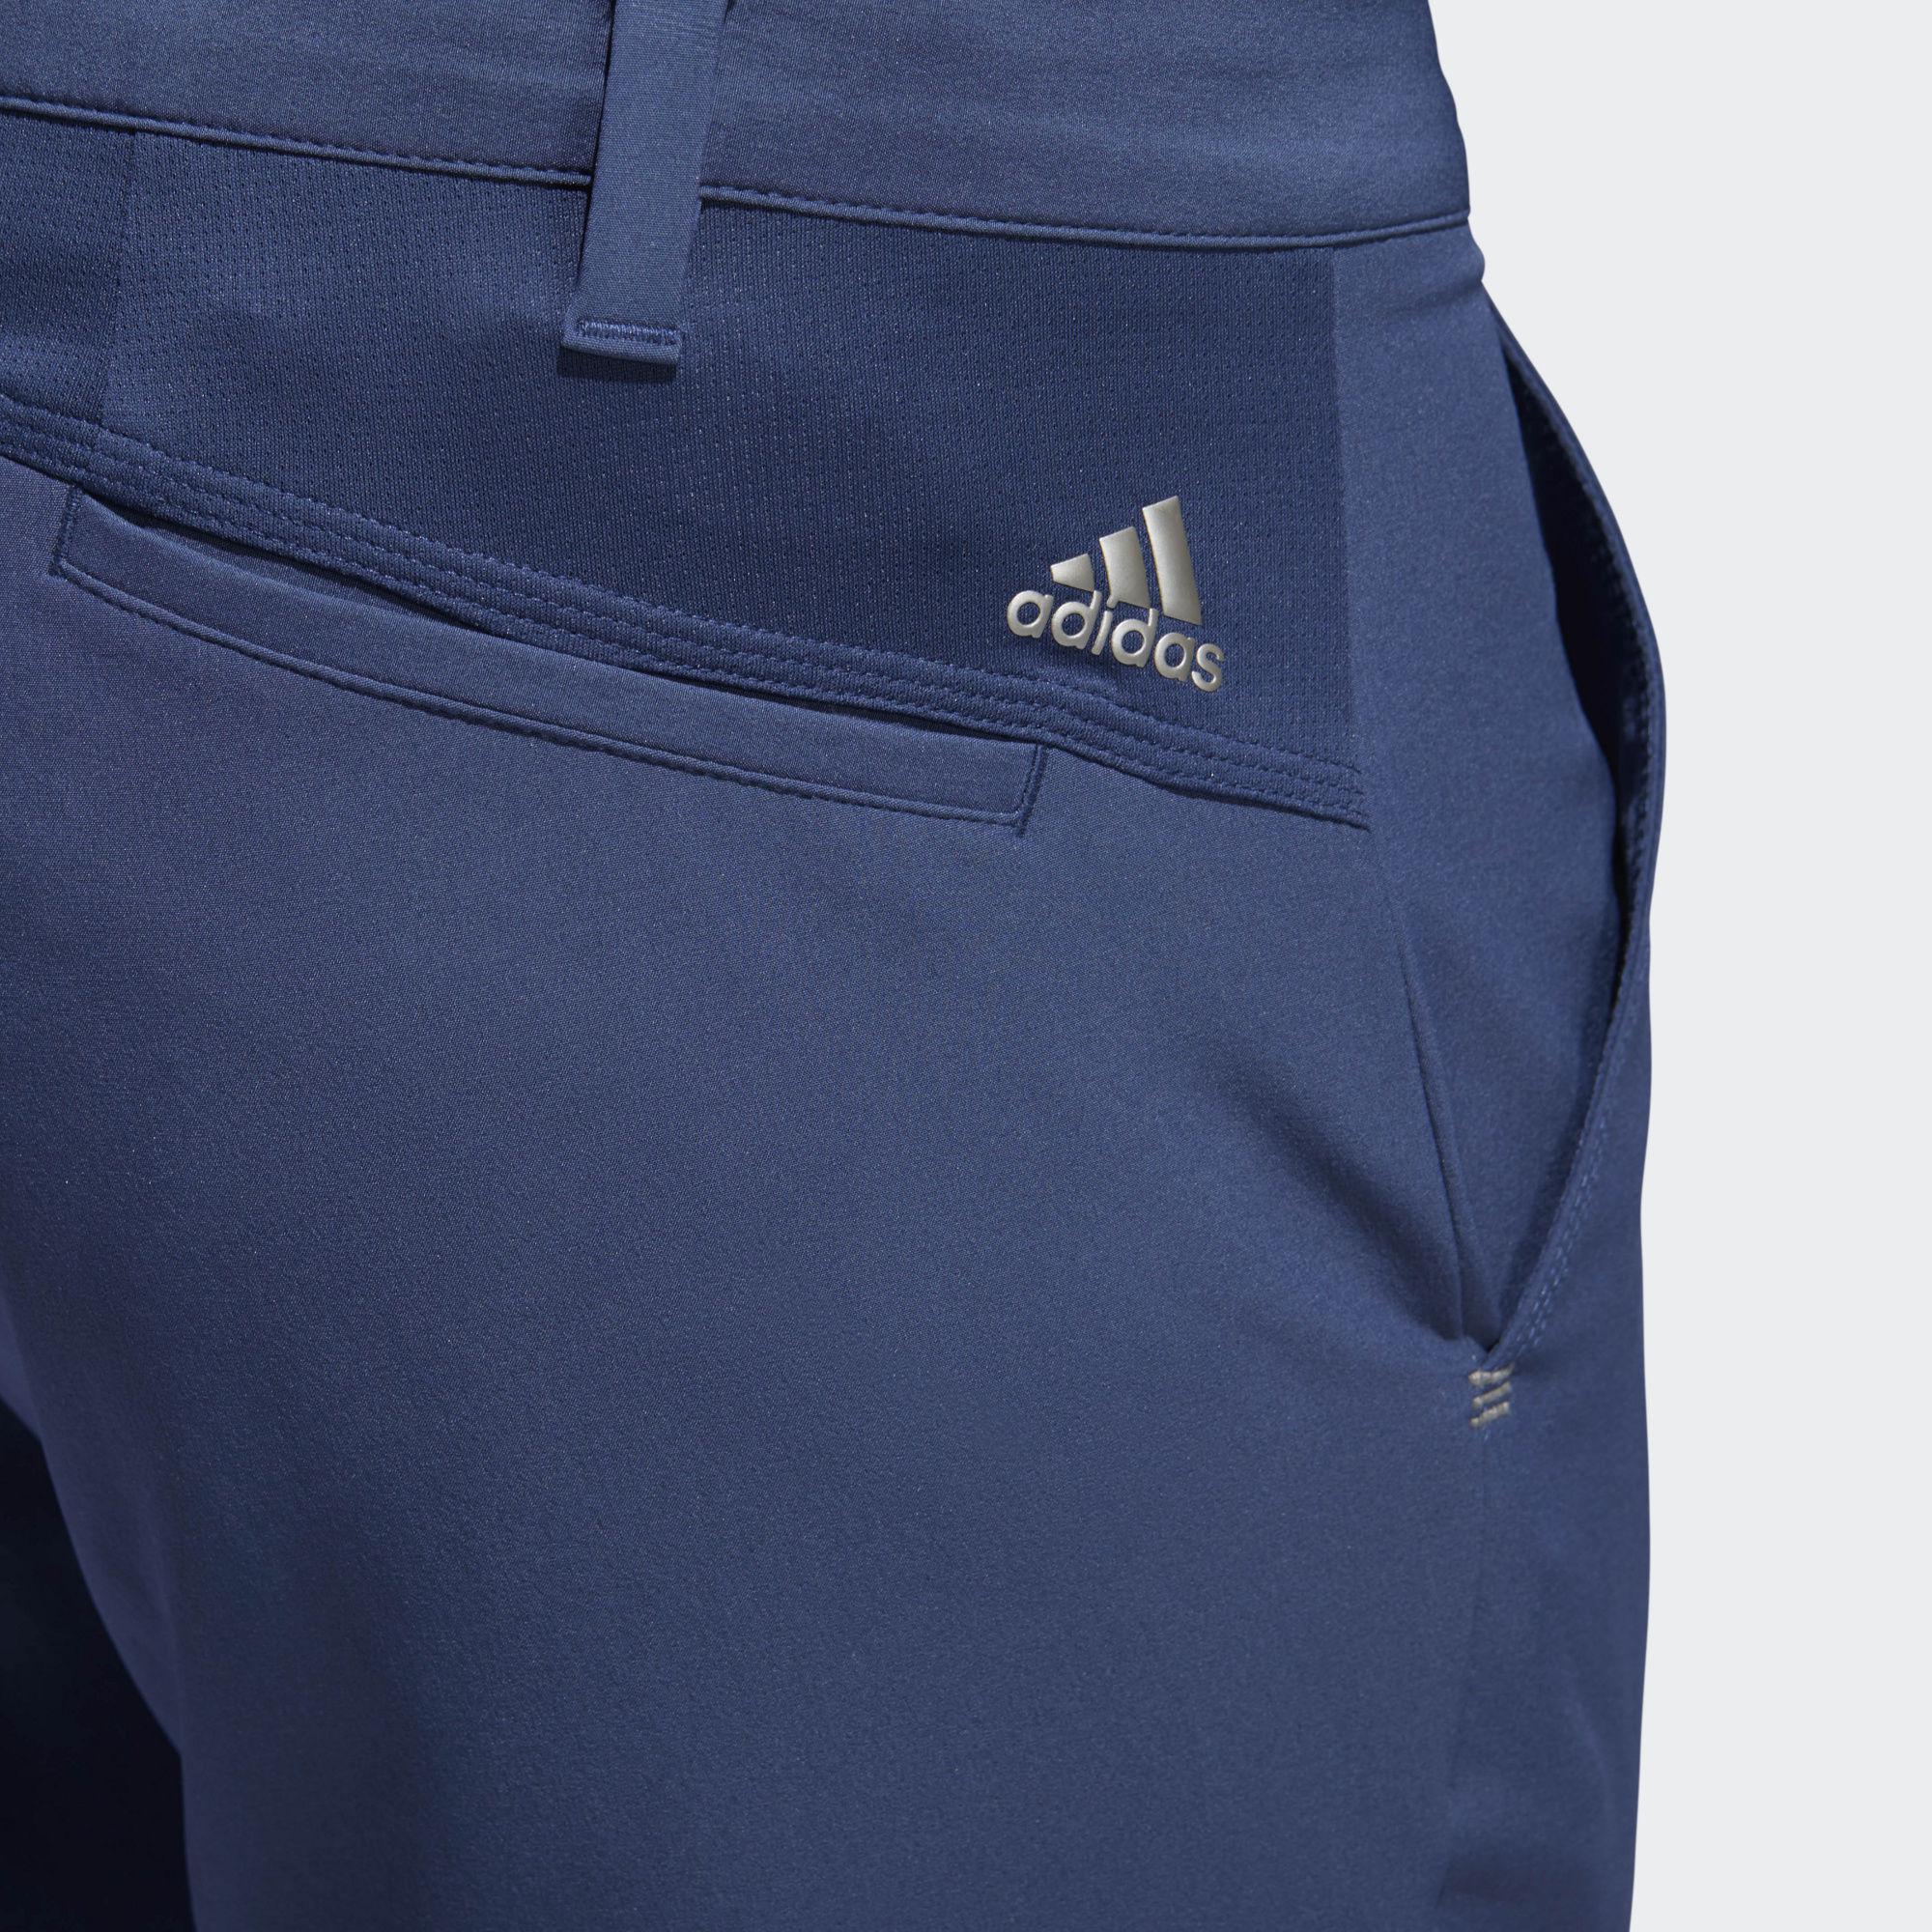 adidas climacool ultimate airflow pants